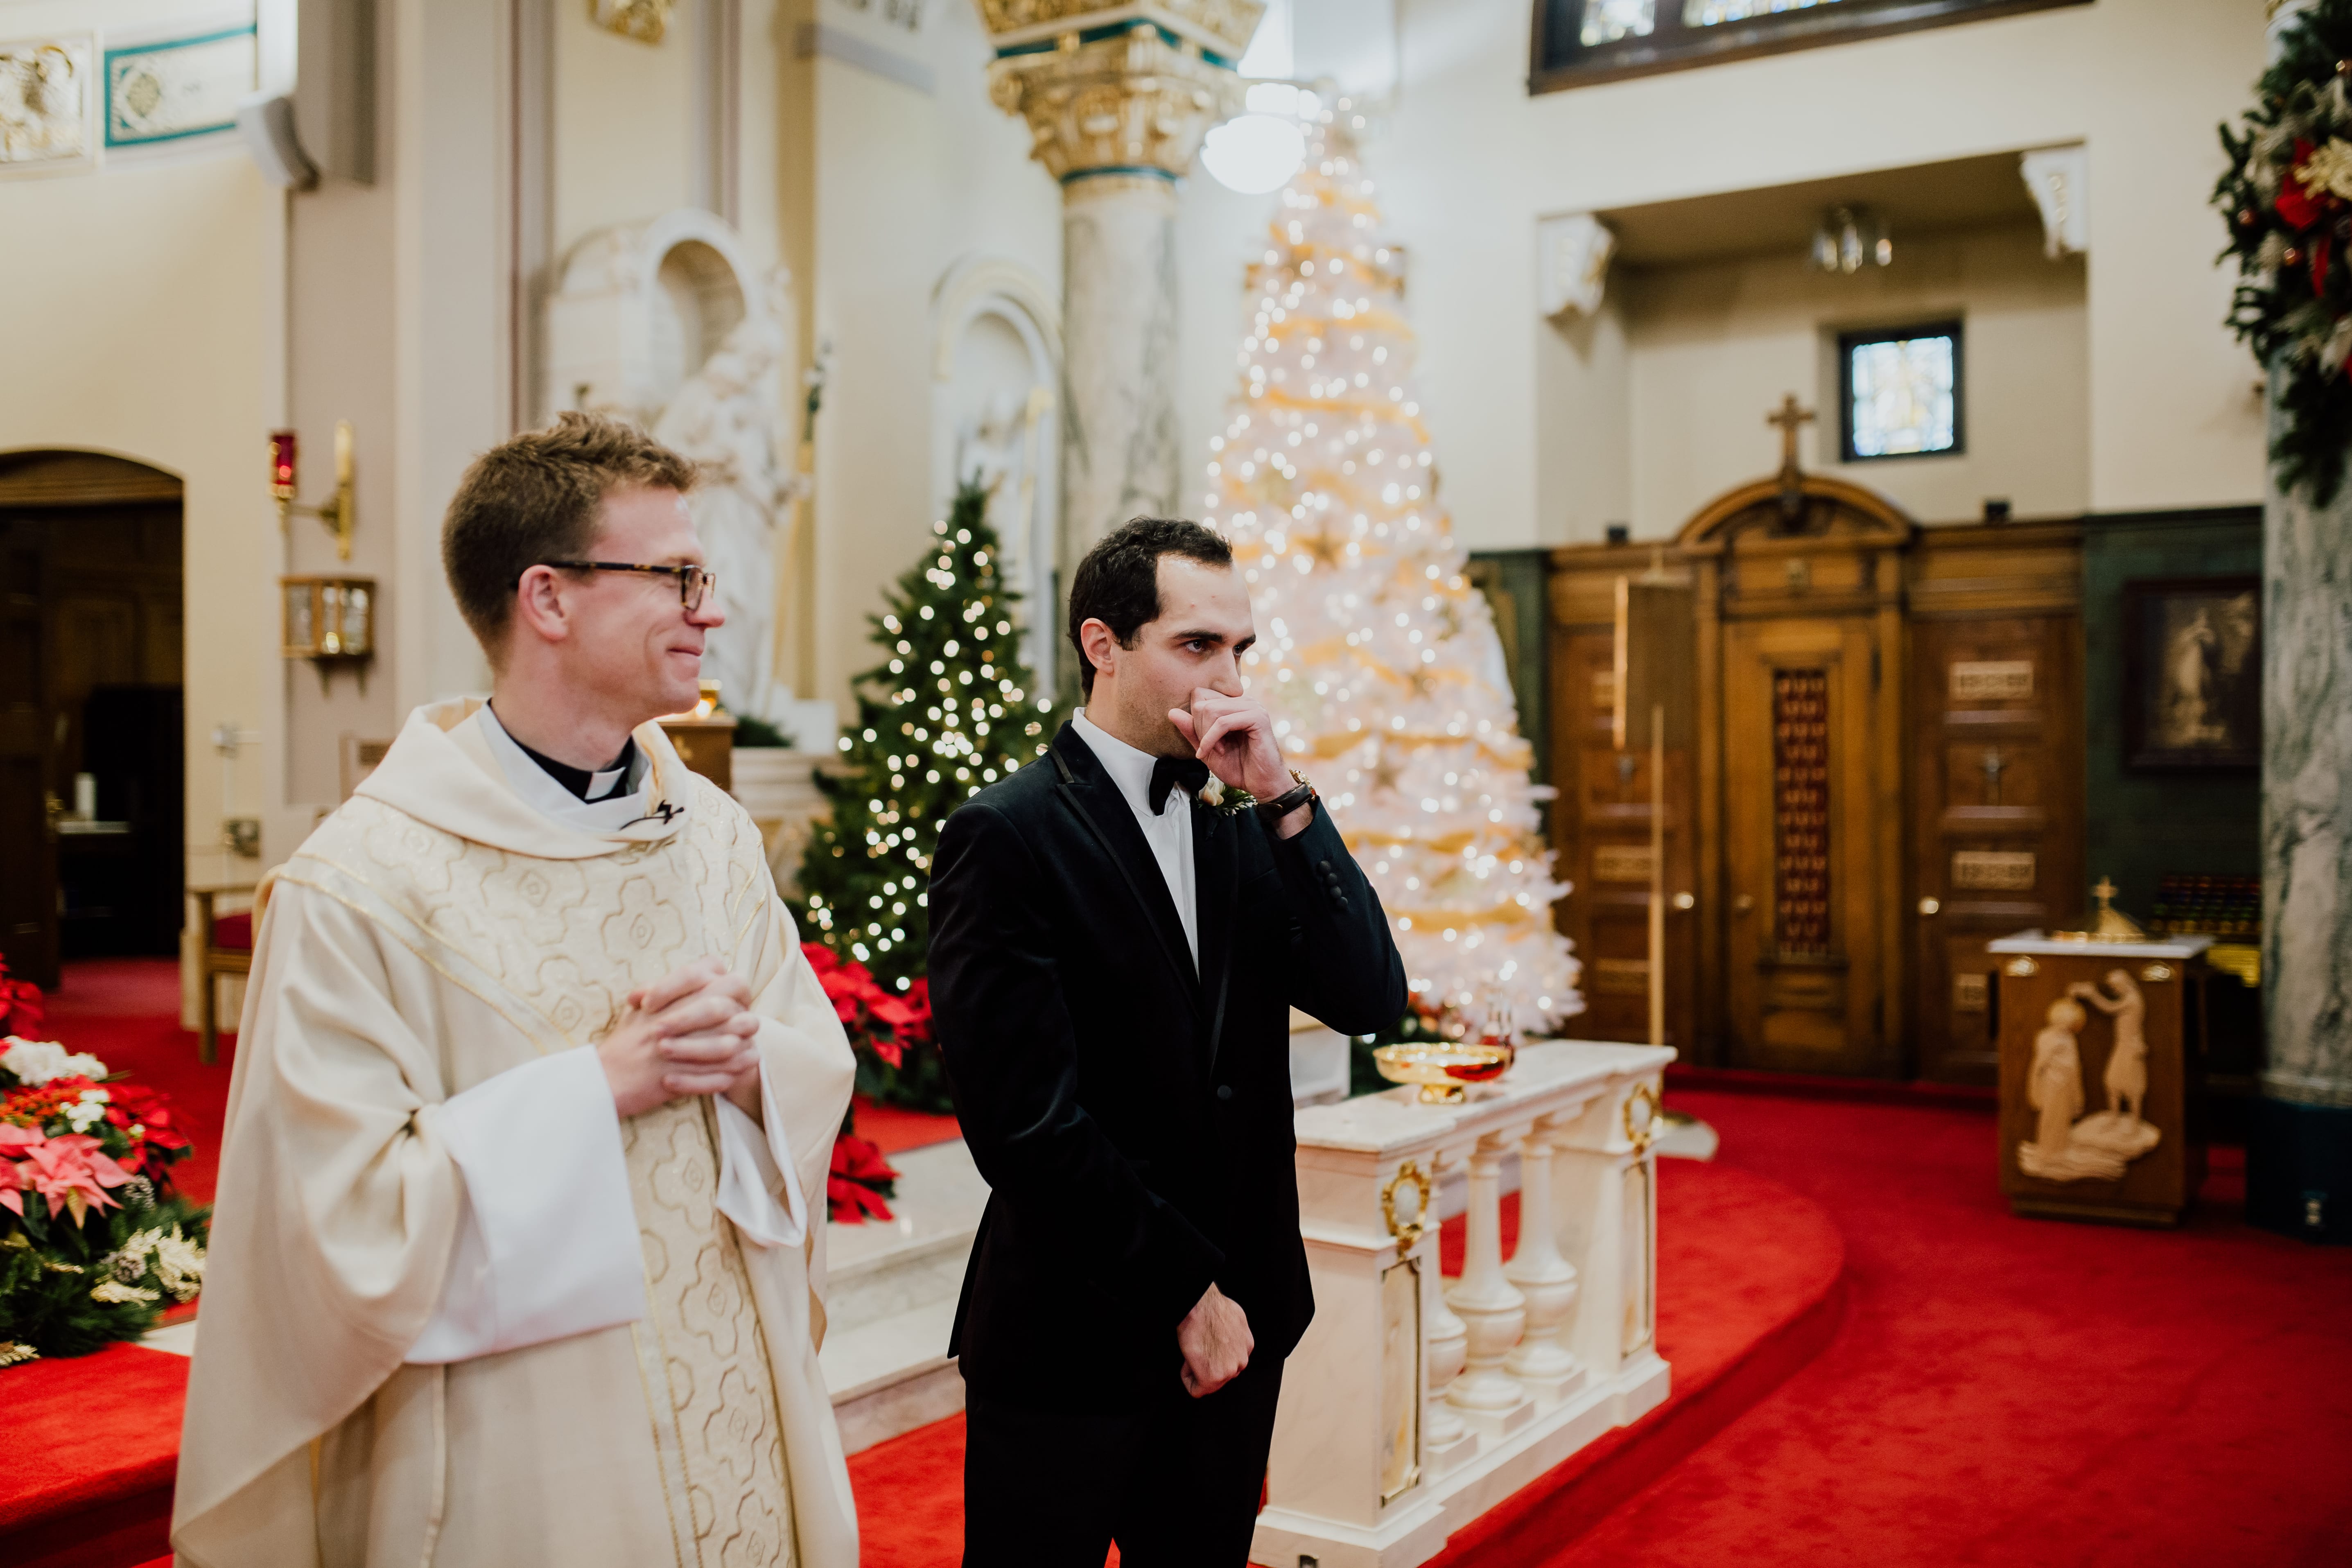 Groom waits with priest for bride